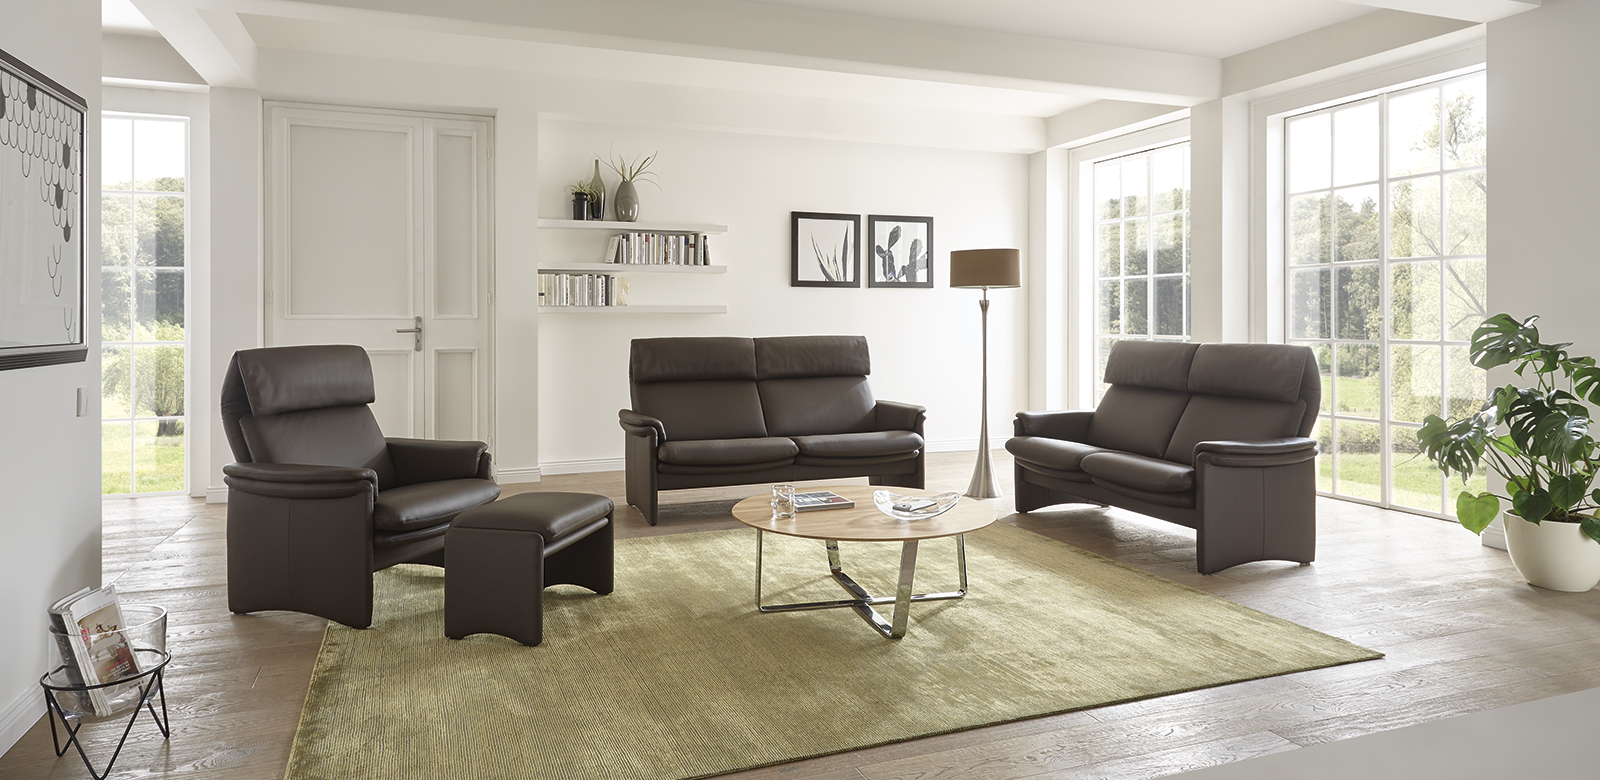 A modern design sofa whose seating comfort you won't want to do without: wonderfully wide neckrests and gently supporting armrest cushions tempt you to close your eyes - not only in the evening hours.